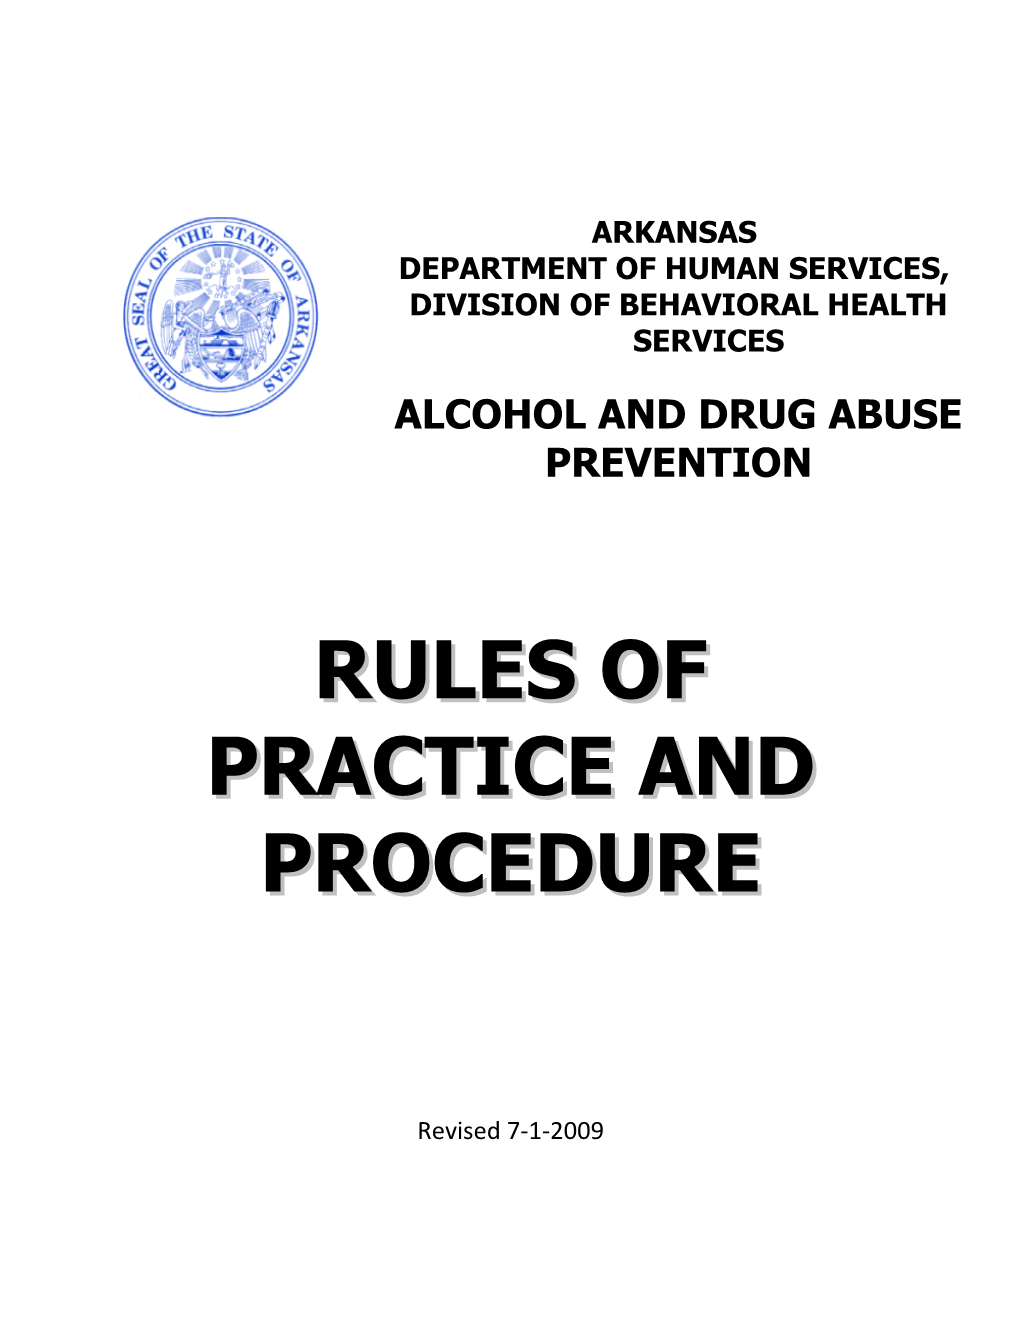 Rules of Practice And